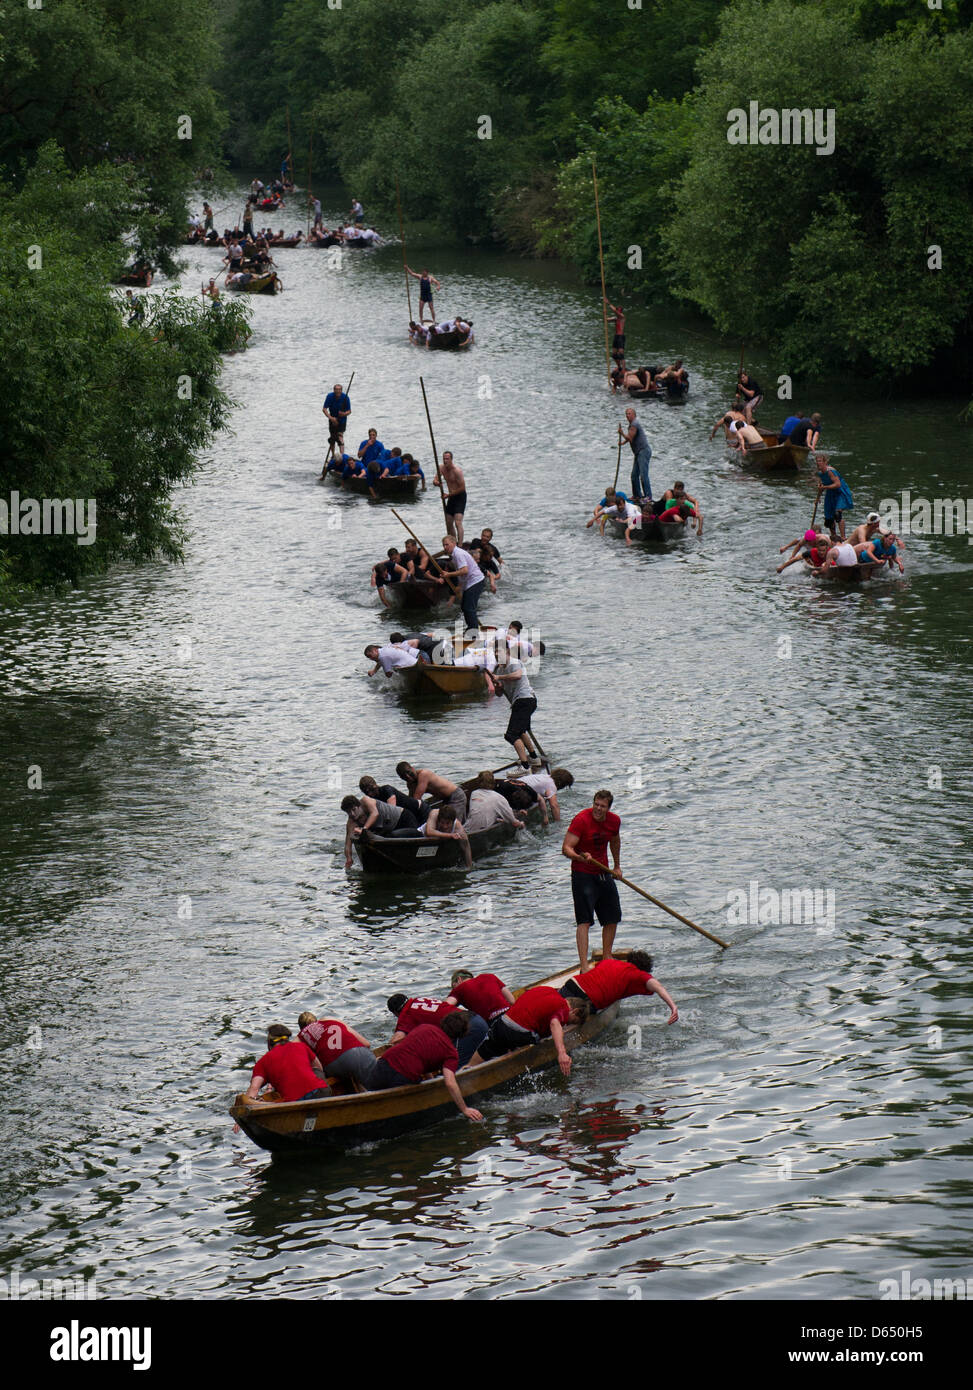 Punt boats compete in a the punt boat race (Stocherkahnrennen) on the river Neckar in Tuebingen, Germany, 07 June 2012. Around 50 punt boats competed in this year's traditional punt boat race. Photo: Marijan Murat Stock Photo